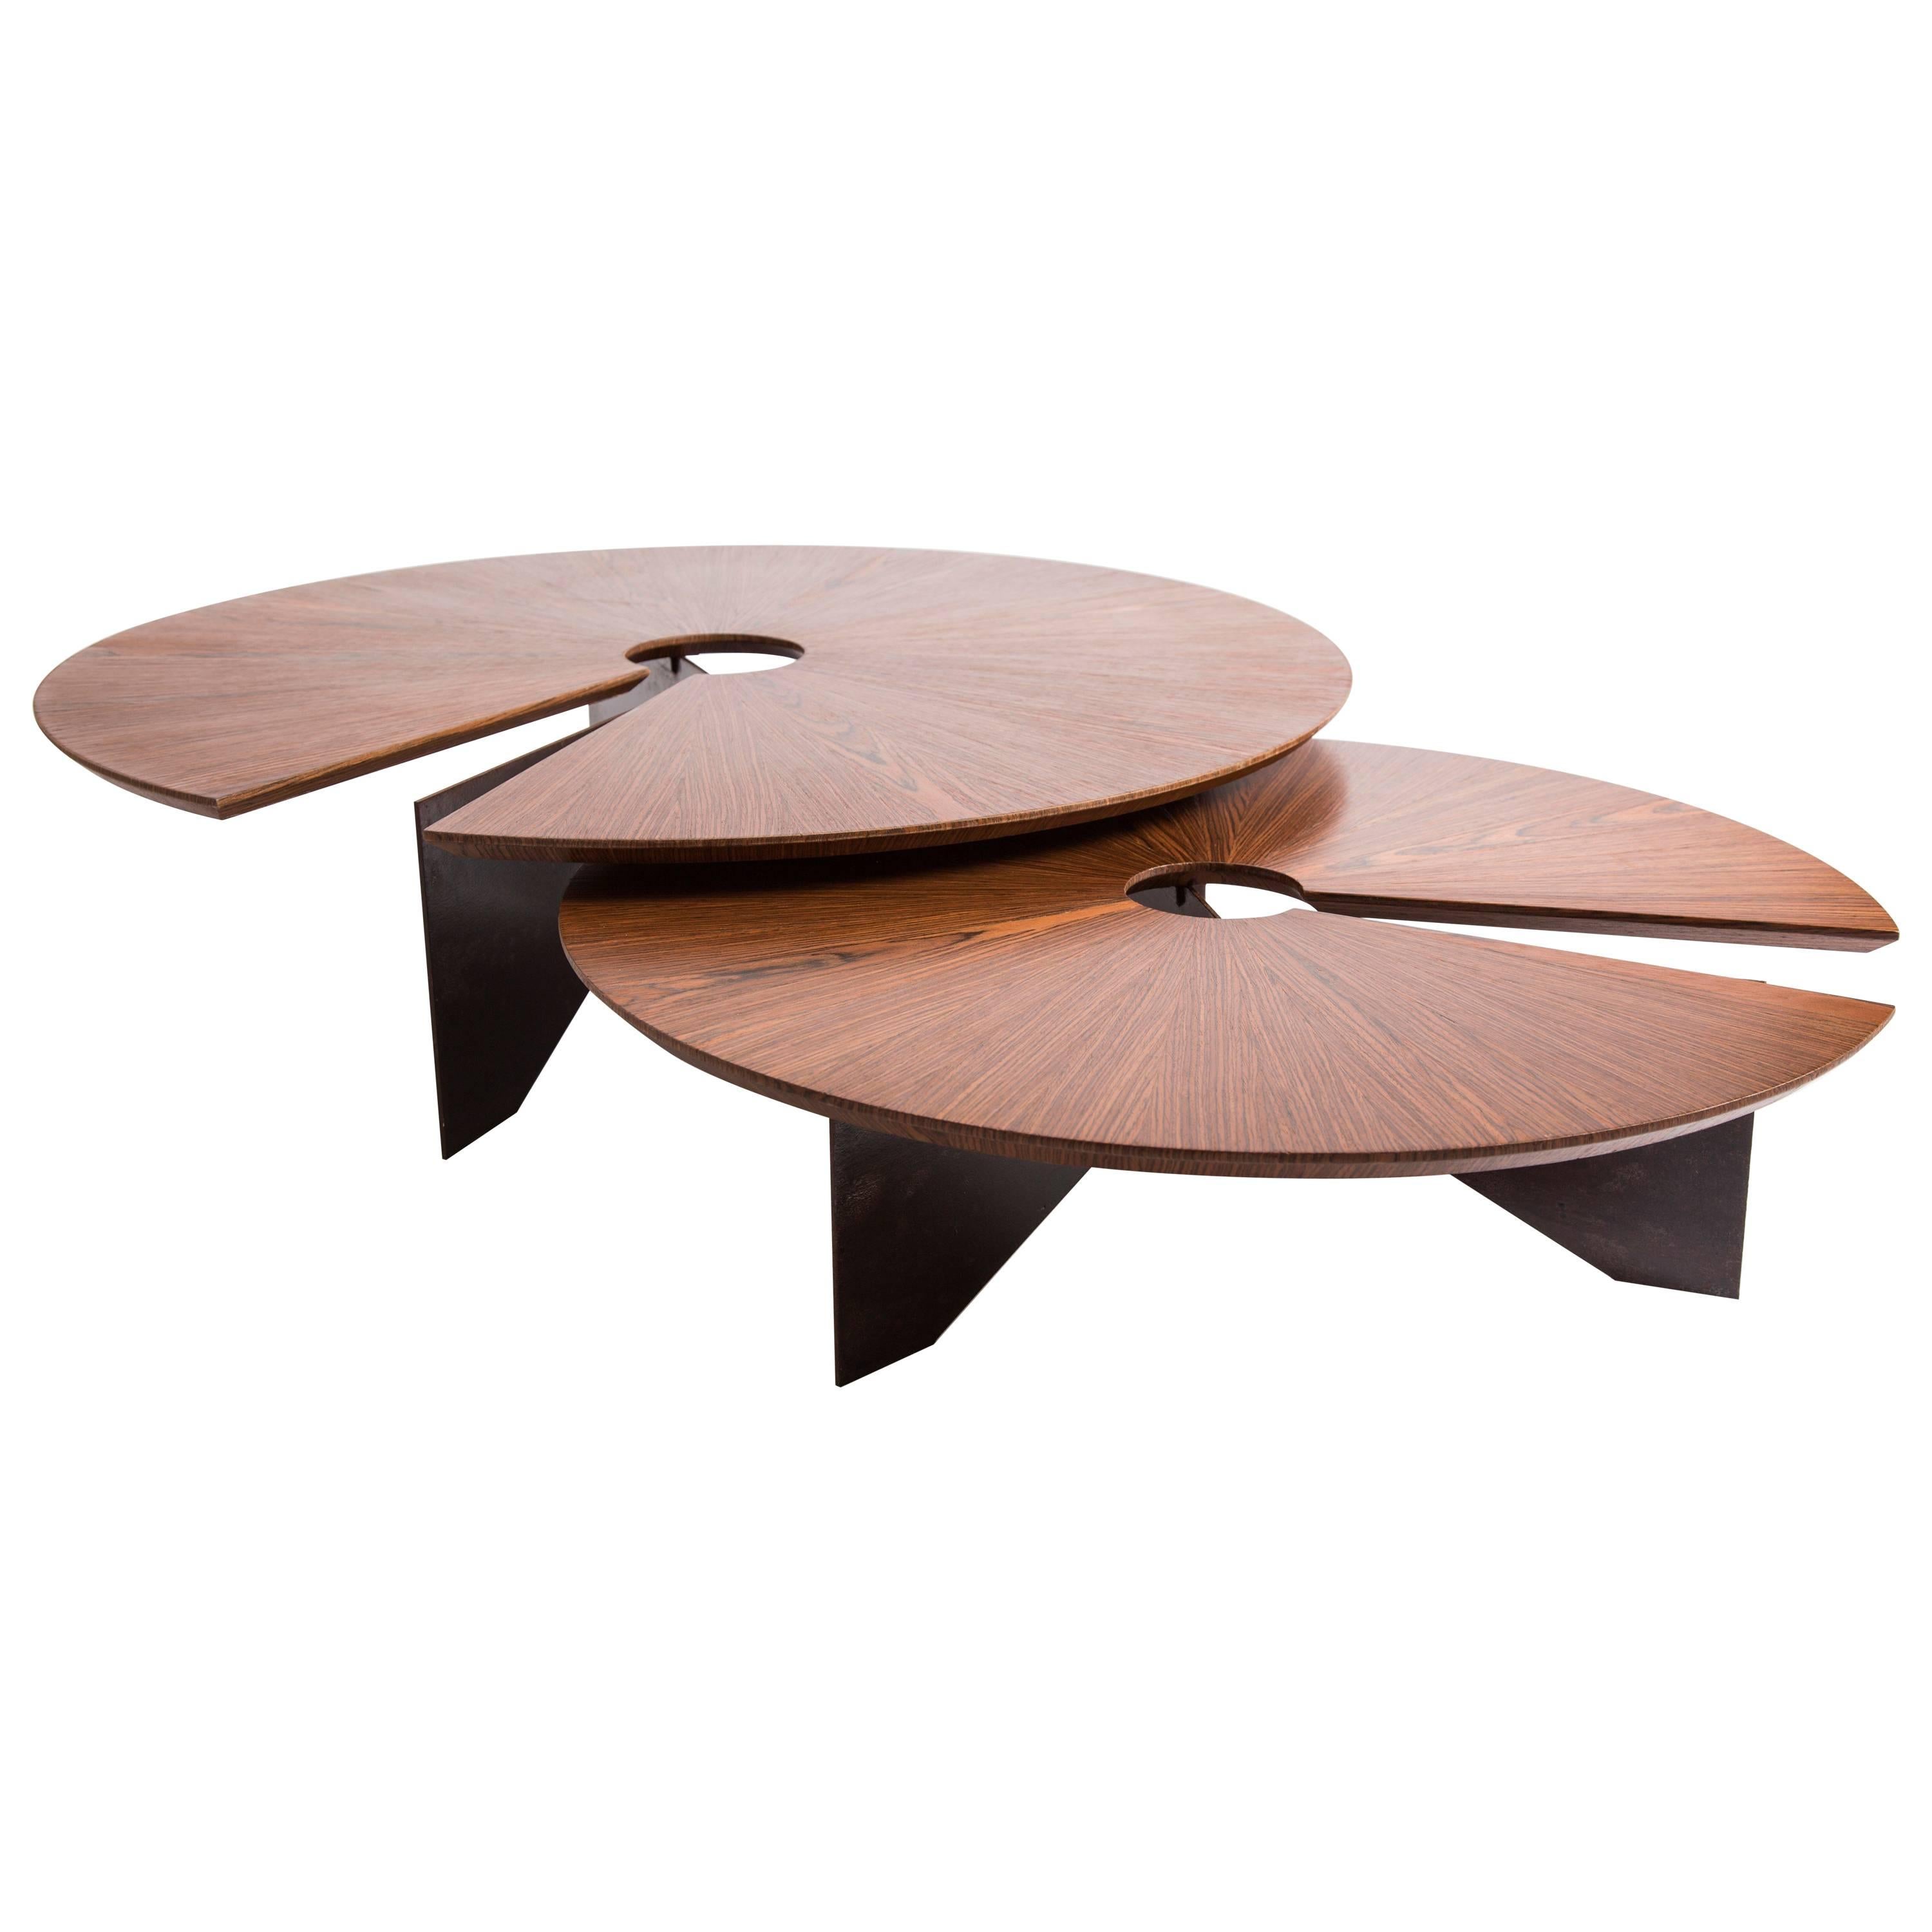 Lena Coffee Table Size Small, Minimalist and Modern Style For Sale